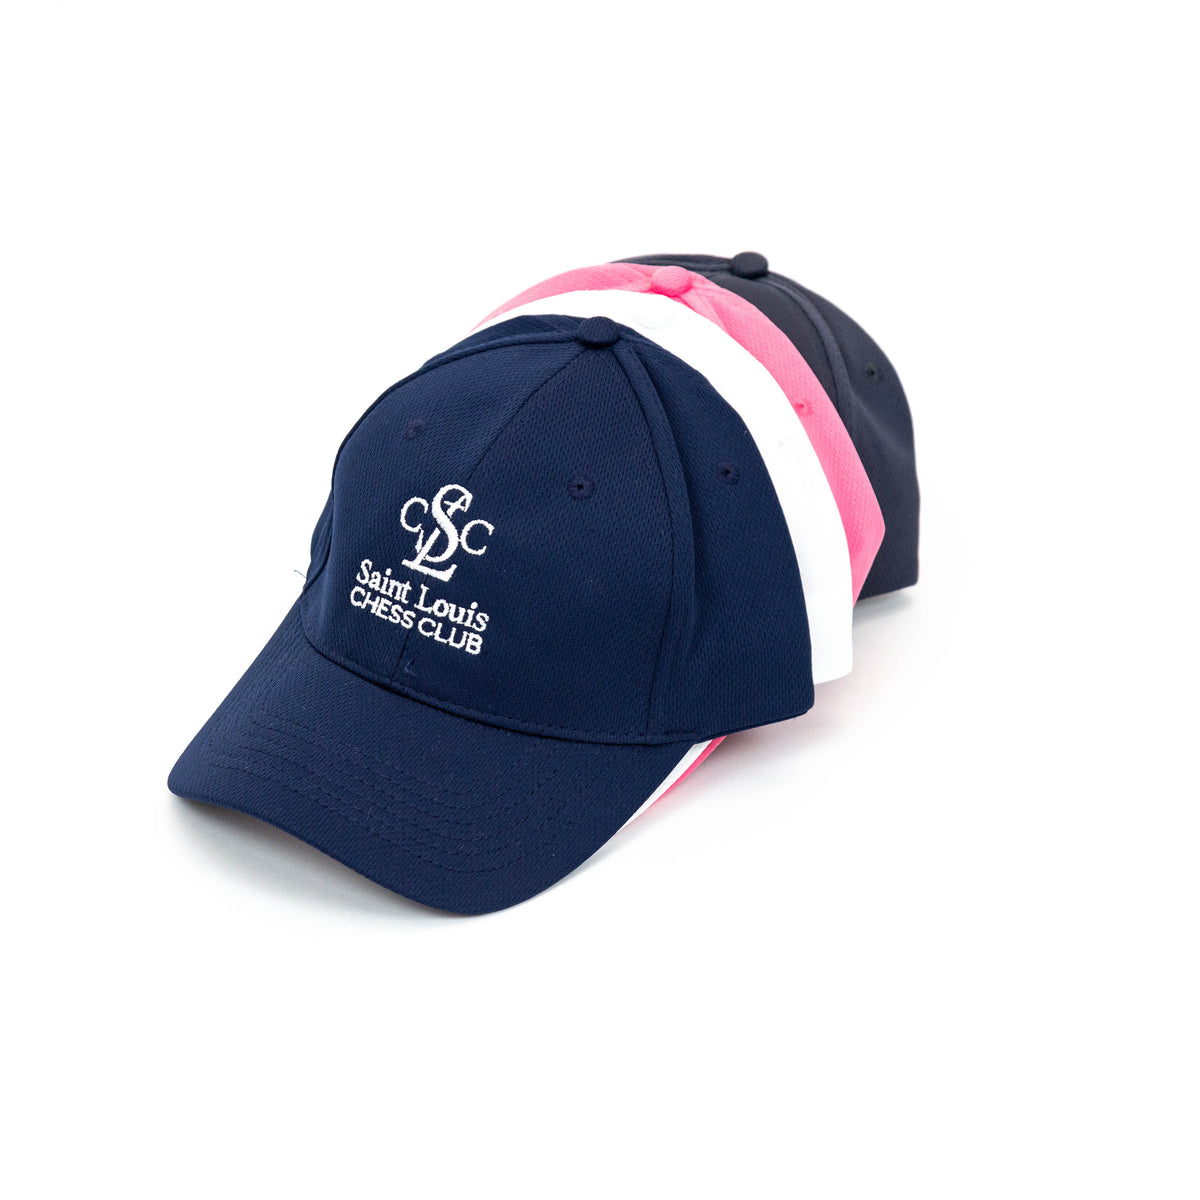 Saint Louis Chess Club Sport Hat – World Chess Hall of Fame